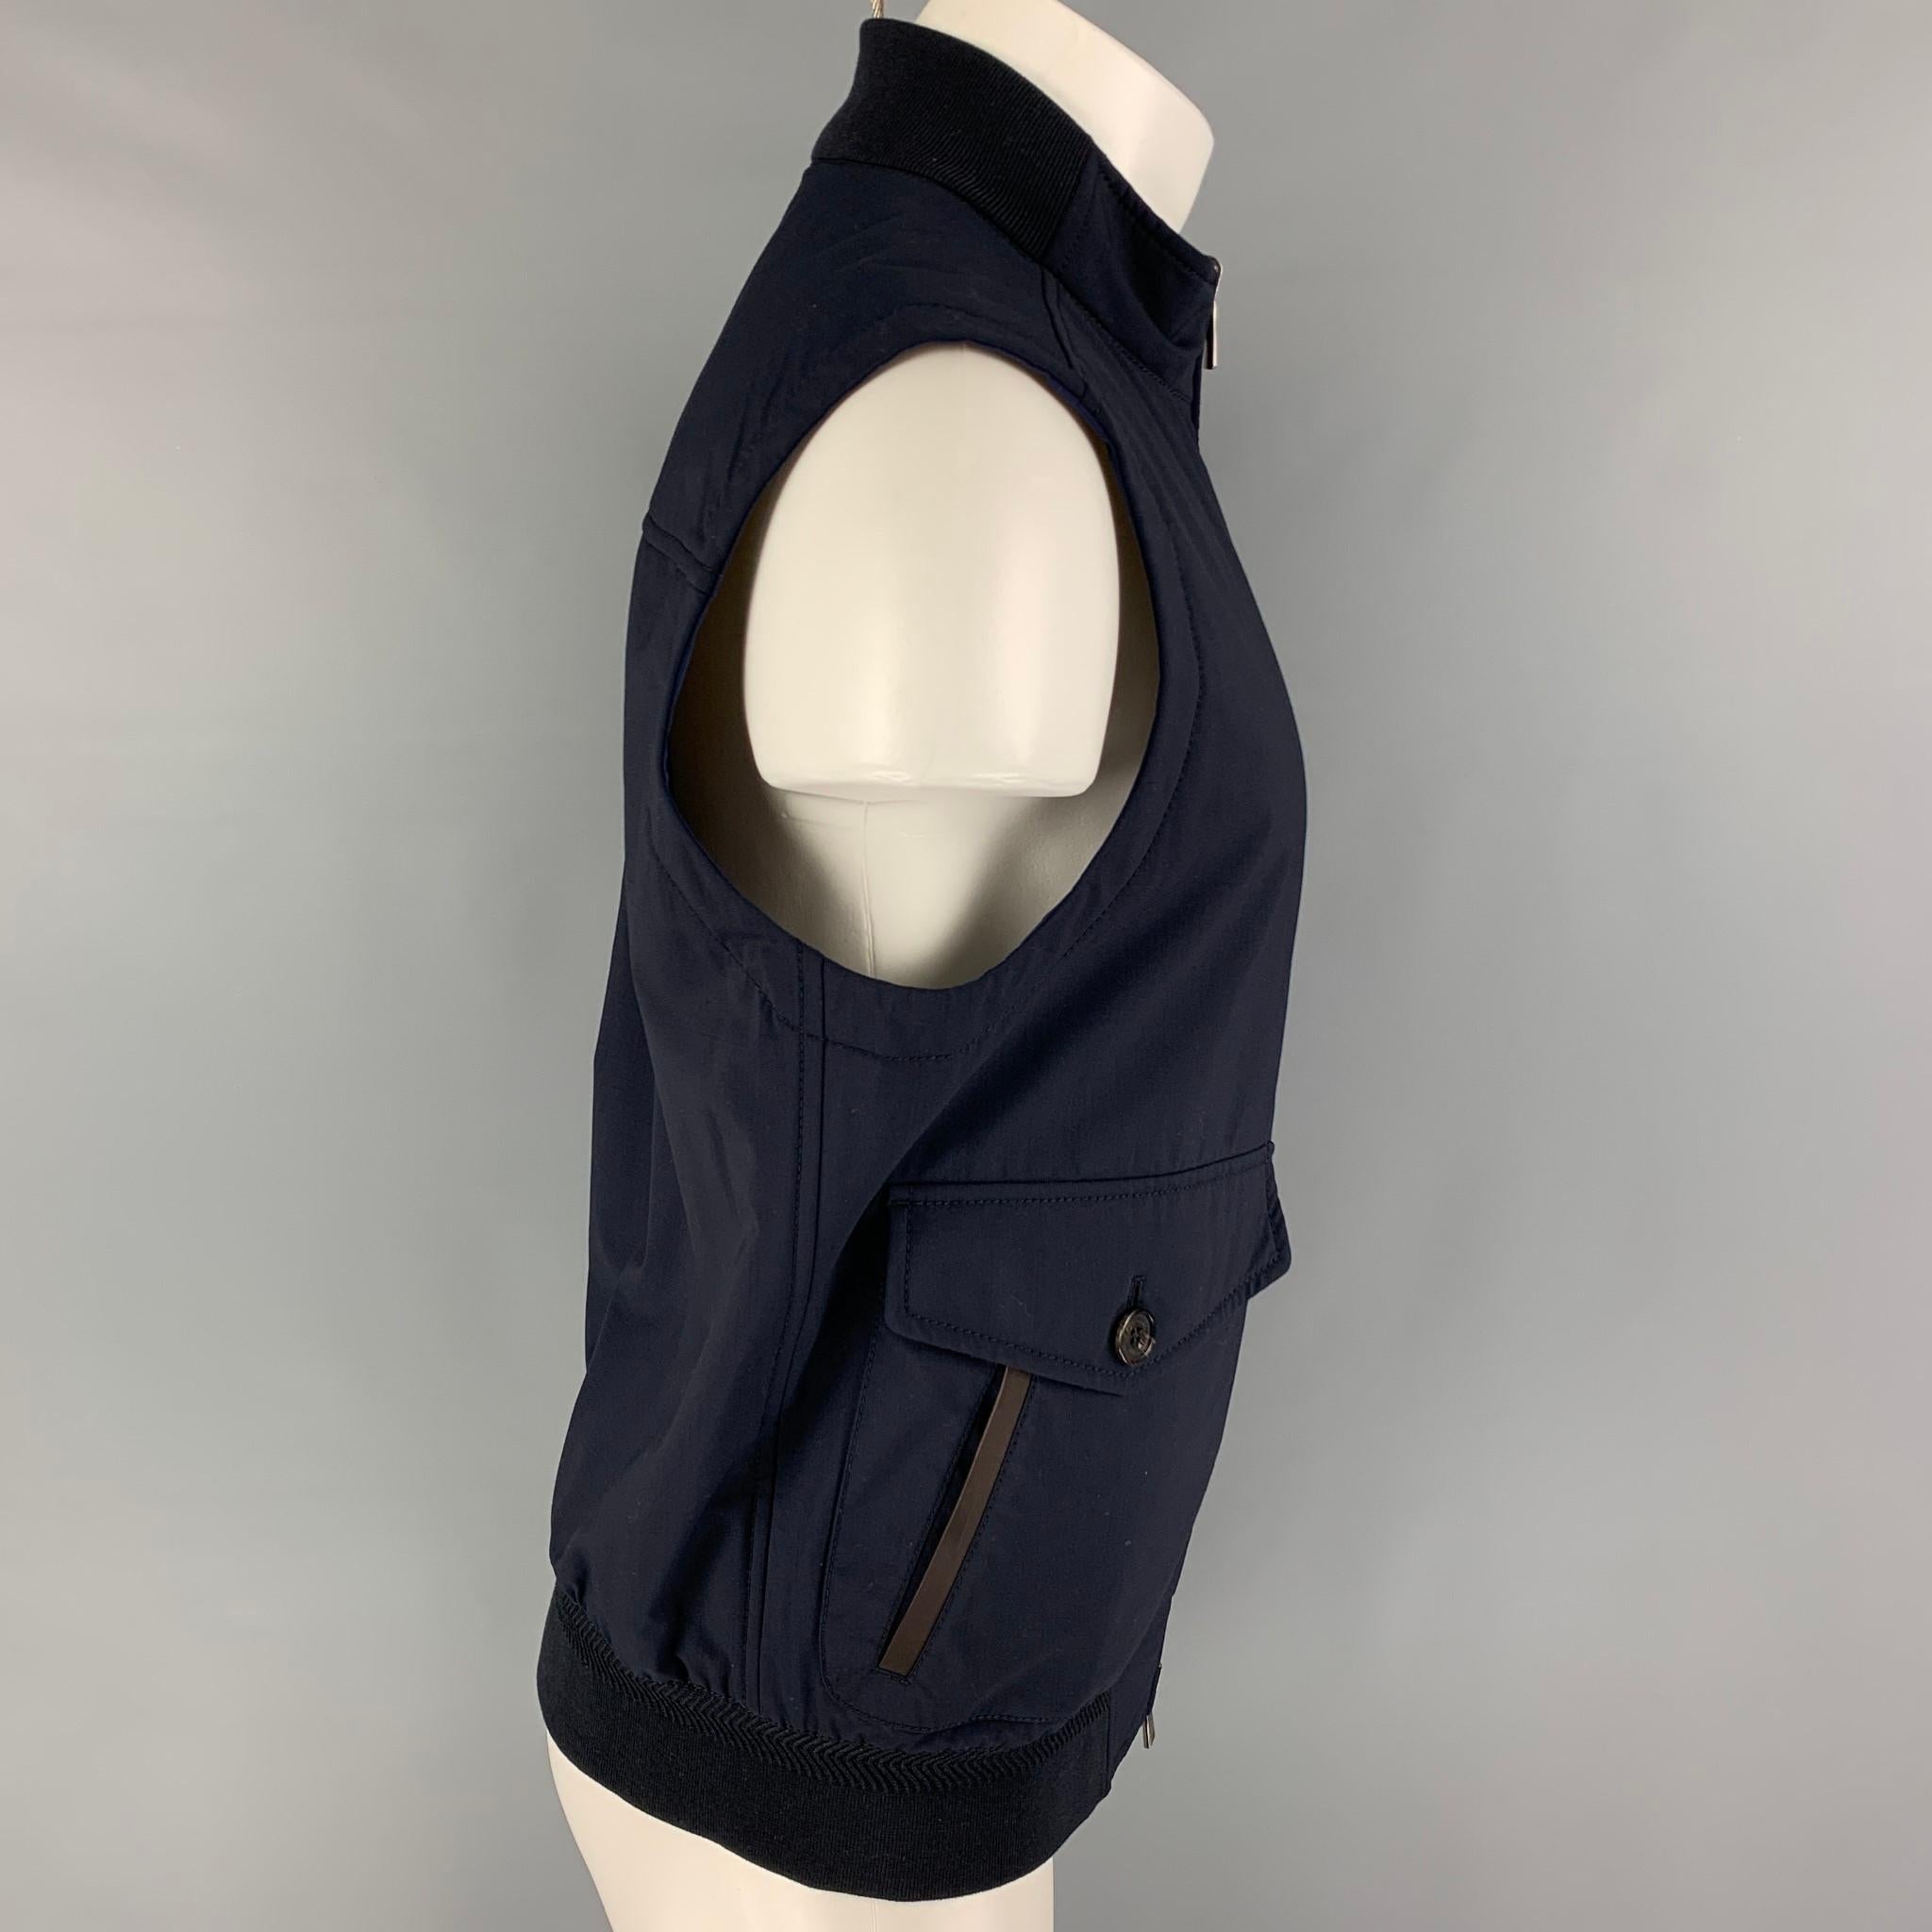 ERMENEGILDO ZEGNA vest comes in a blue wool / polyester featuring a reversible style, black ribbed hem, flap pockets, and a full zip up closure. Made in Italy. 

Excellent Pre-Owned Condition.
Marked: 50 R

Measurements:

Shoulder: 17.5 in.
Chest: